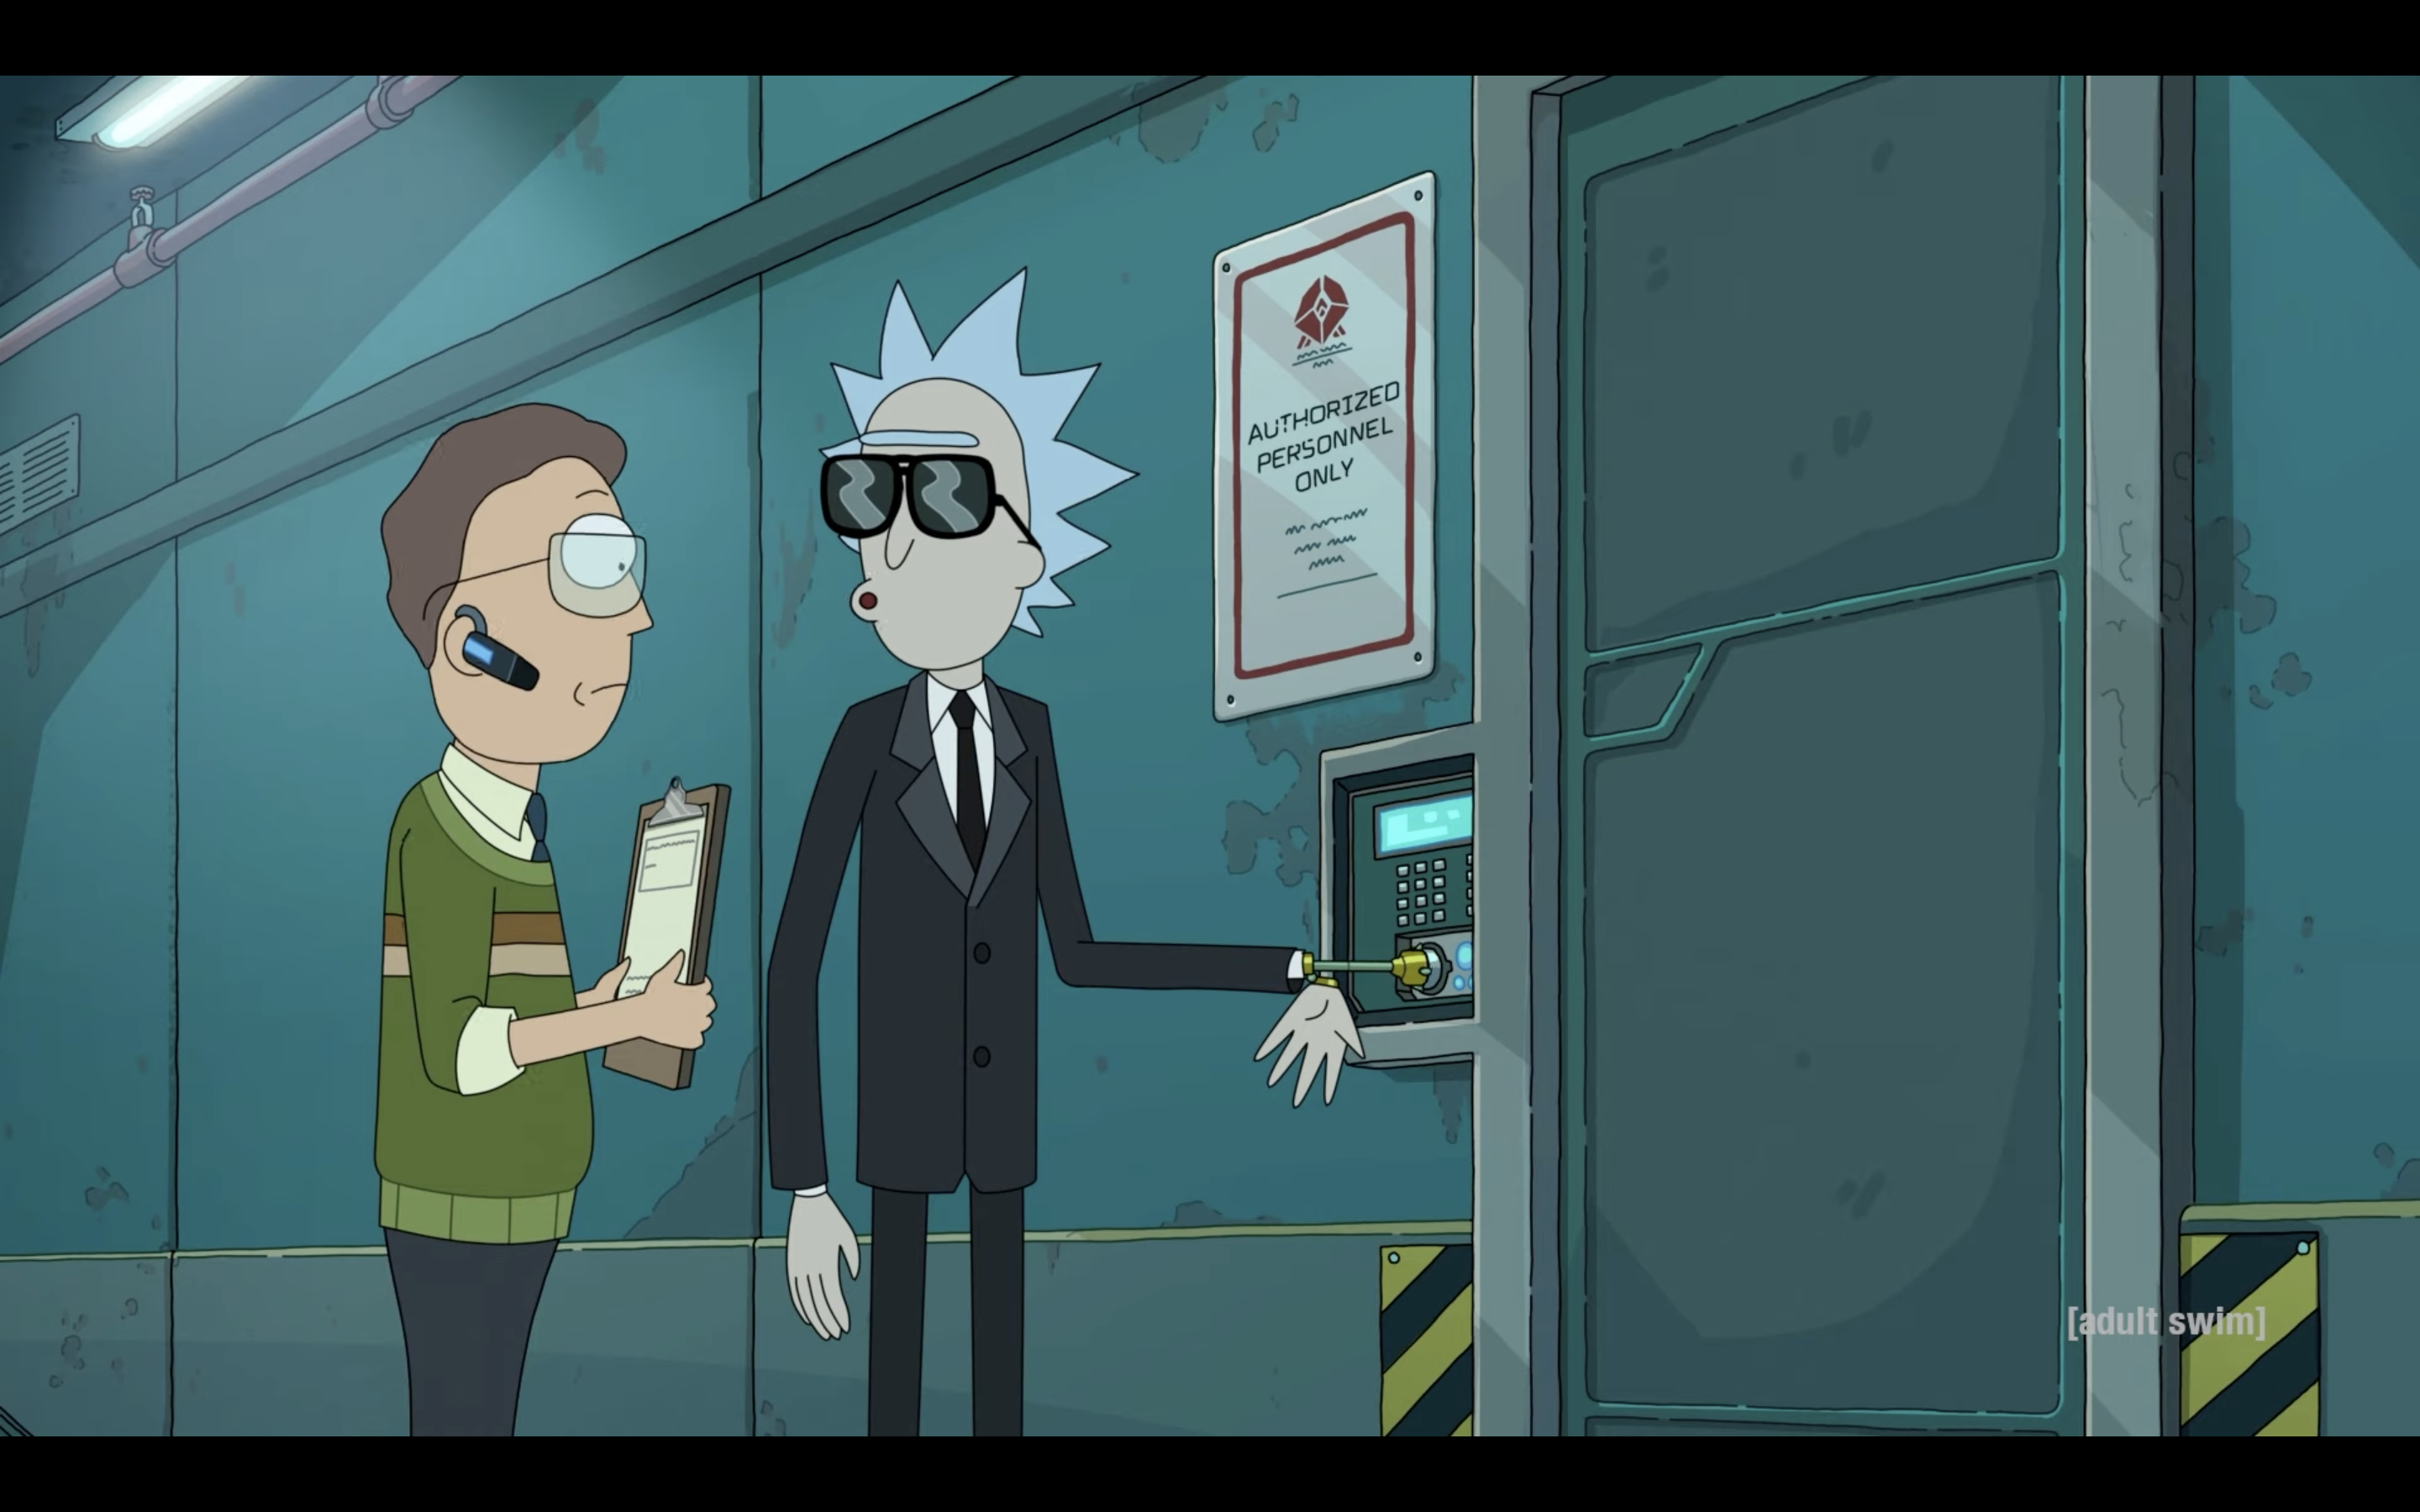 Can You Watch Rick and Morty Free Online via Streaming